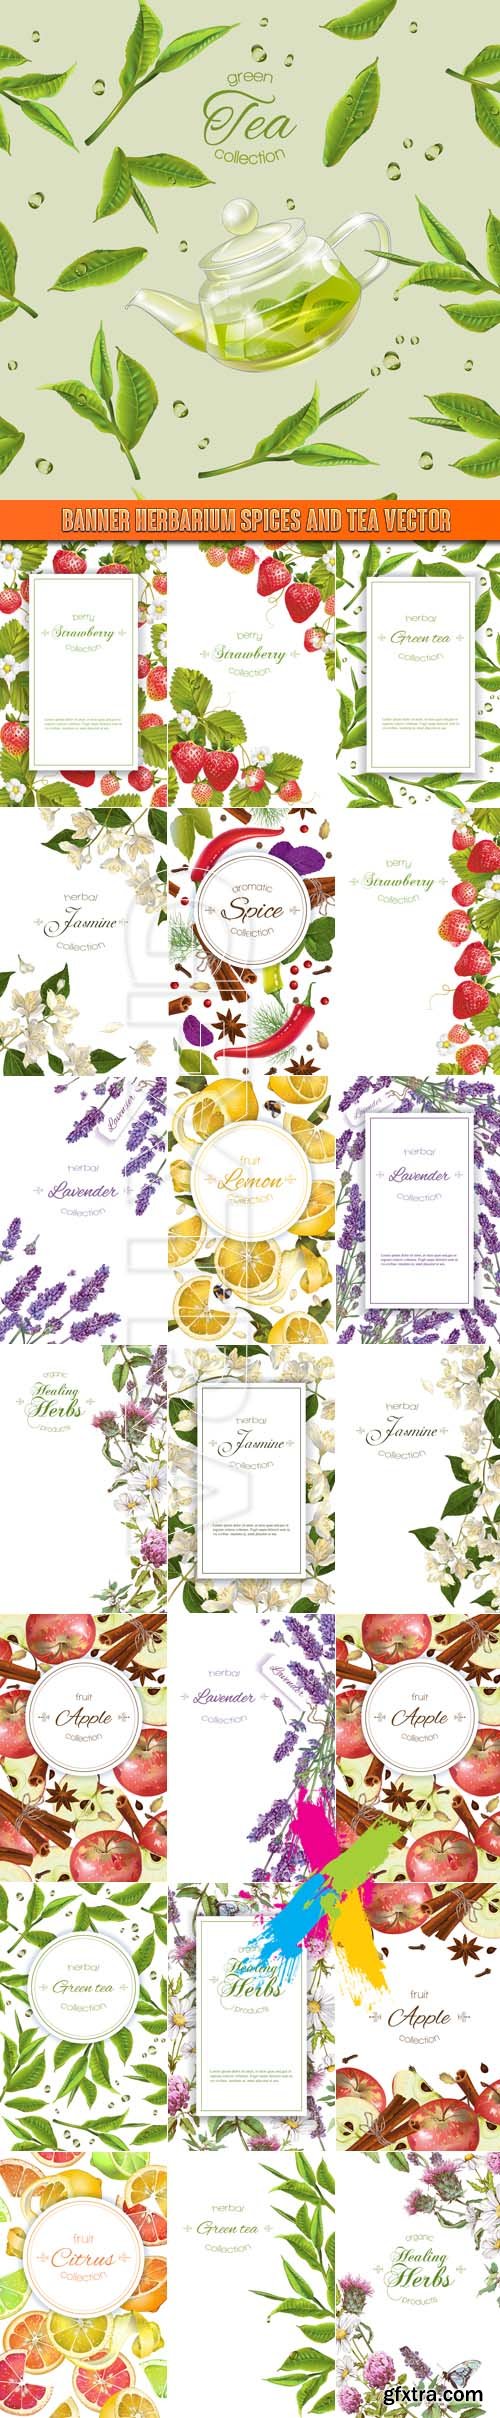 Banner herbarium spices and tea vector